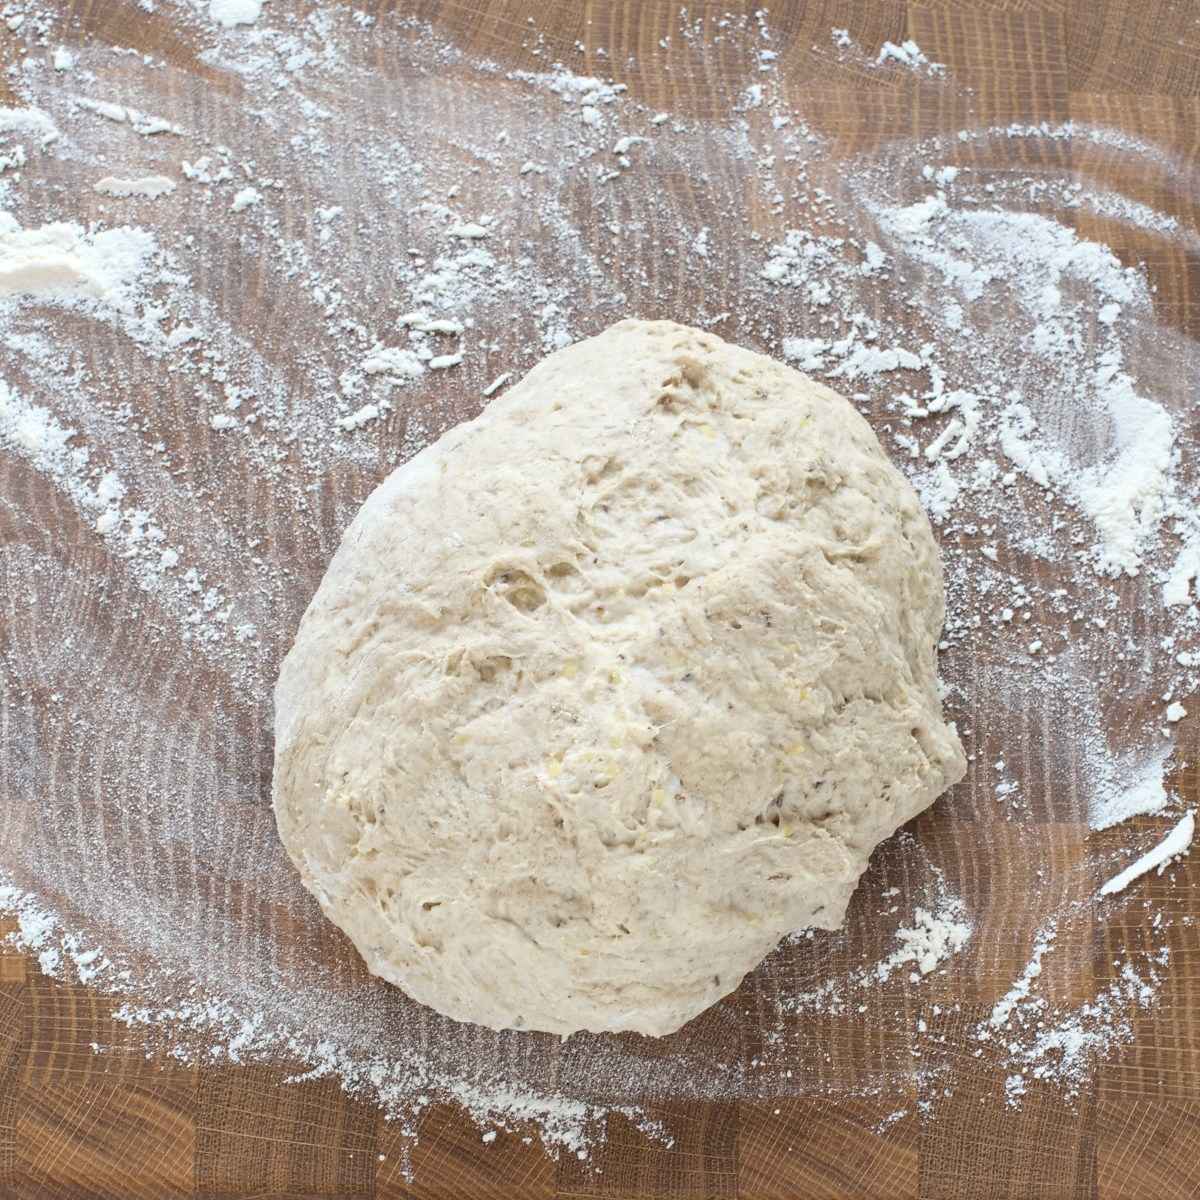 Bread dough on a floured working surface.